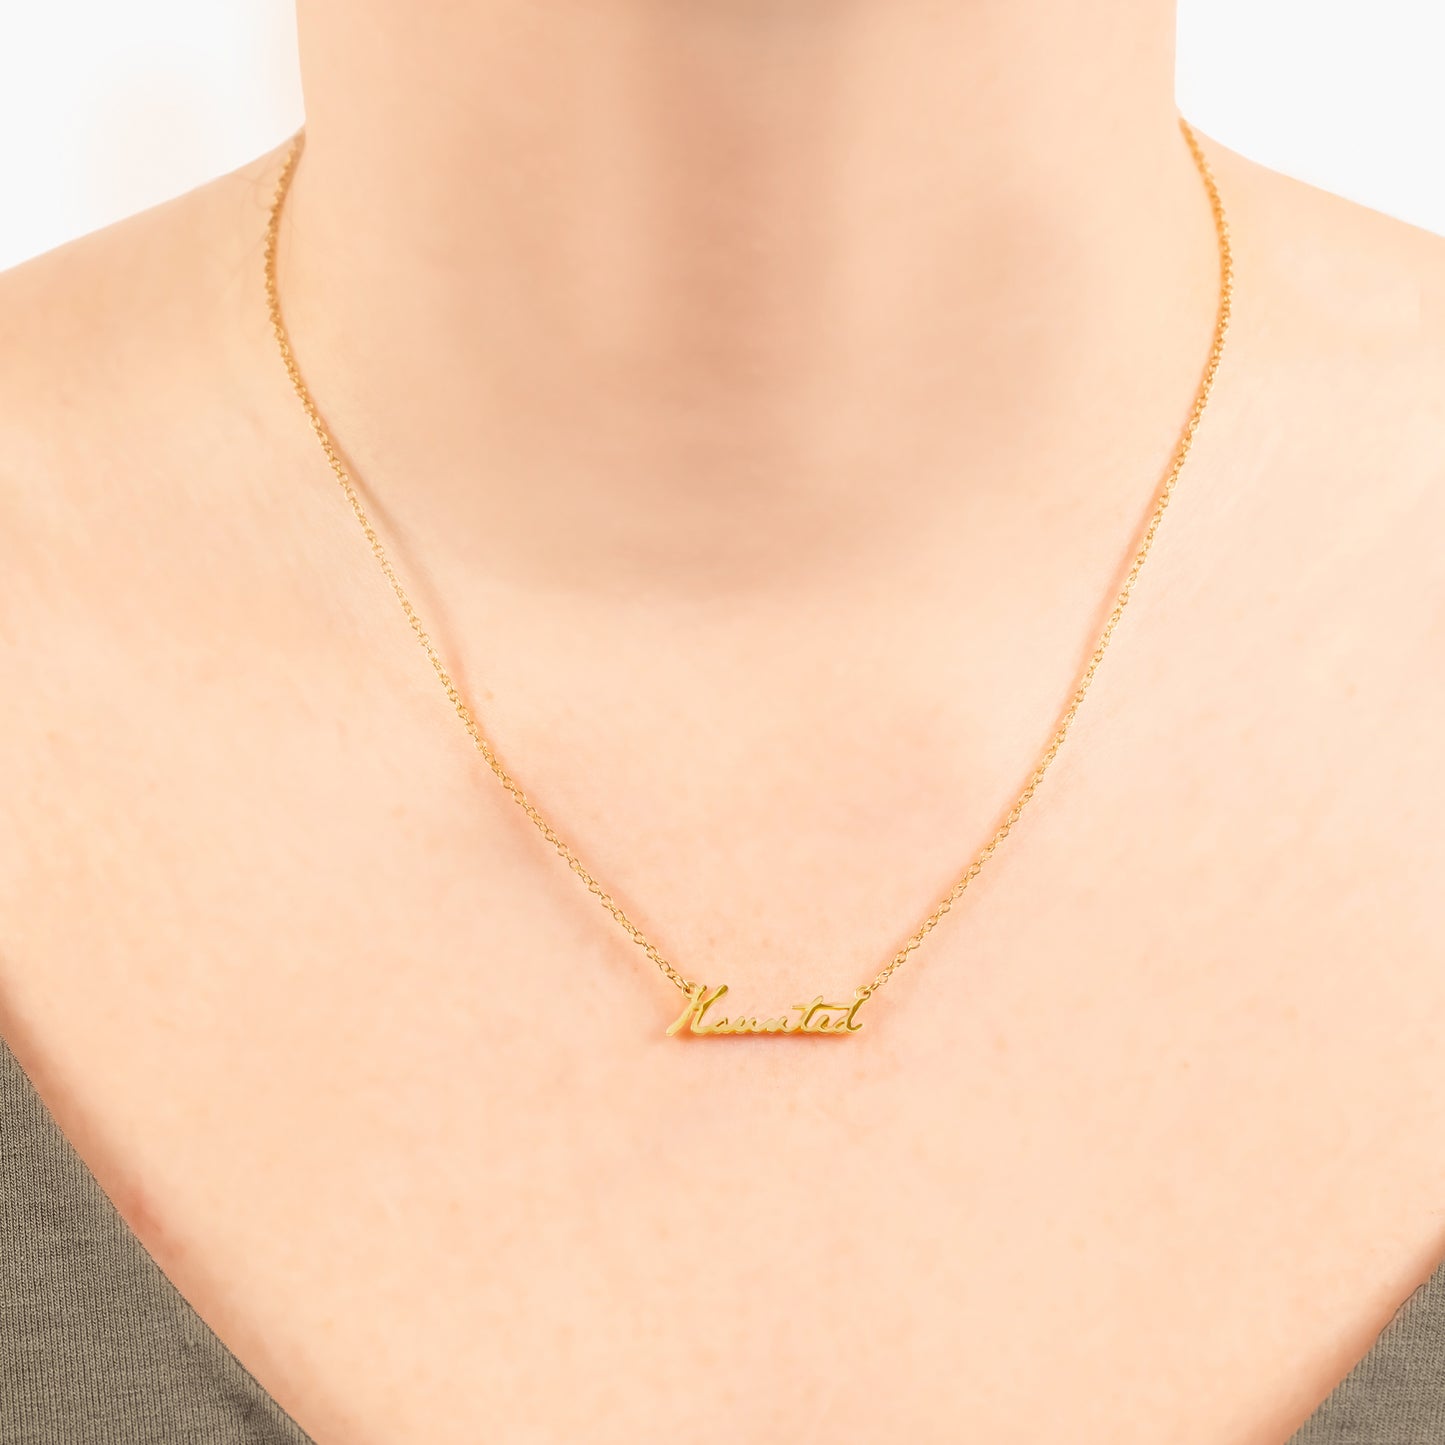 Haunted Gold-Plated Necklace